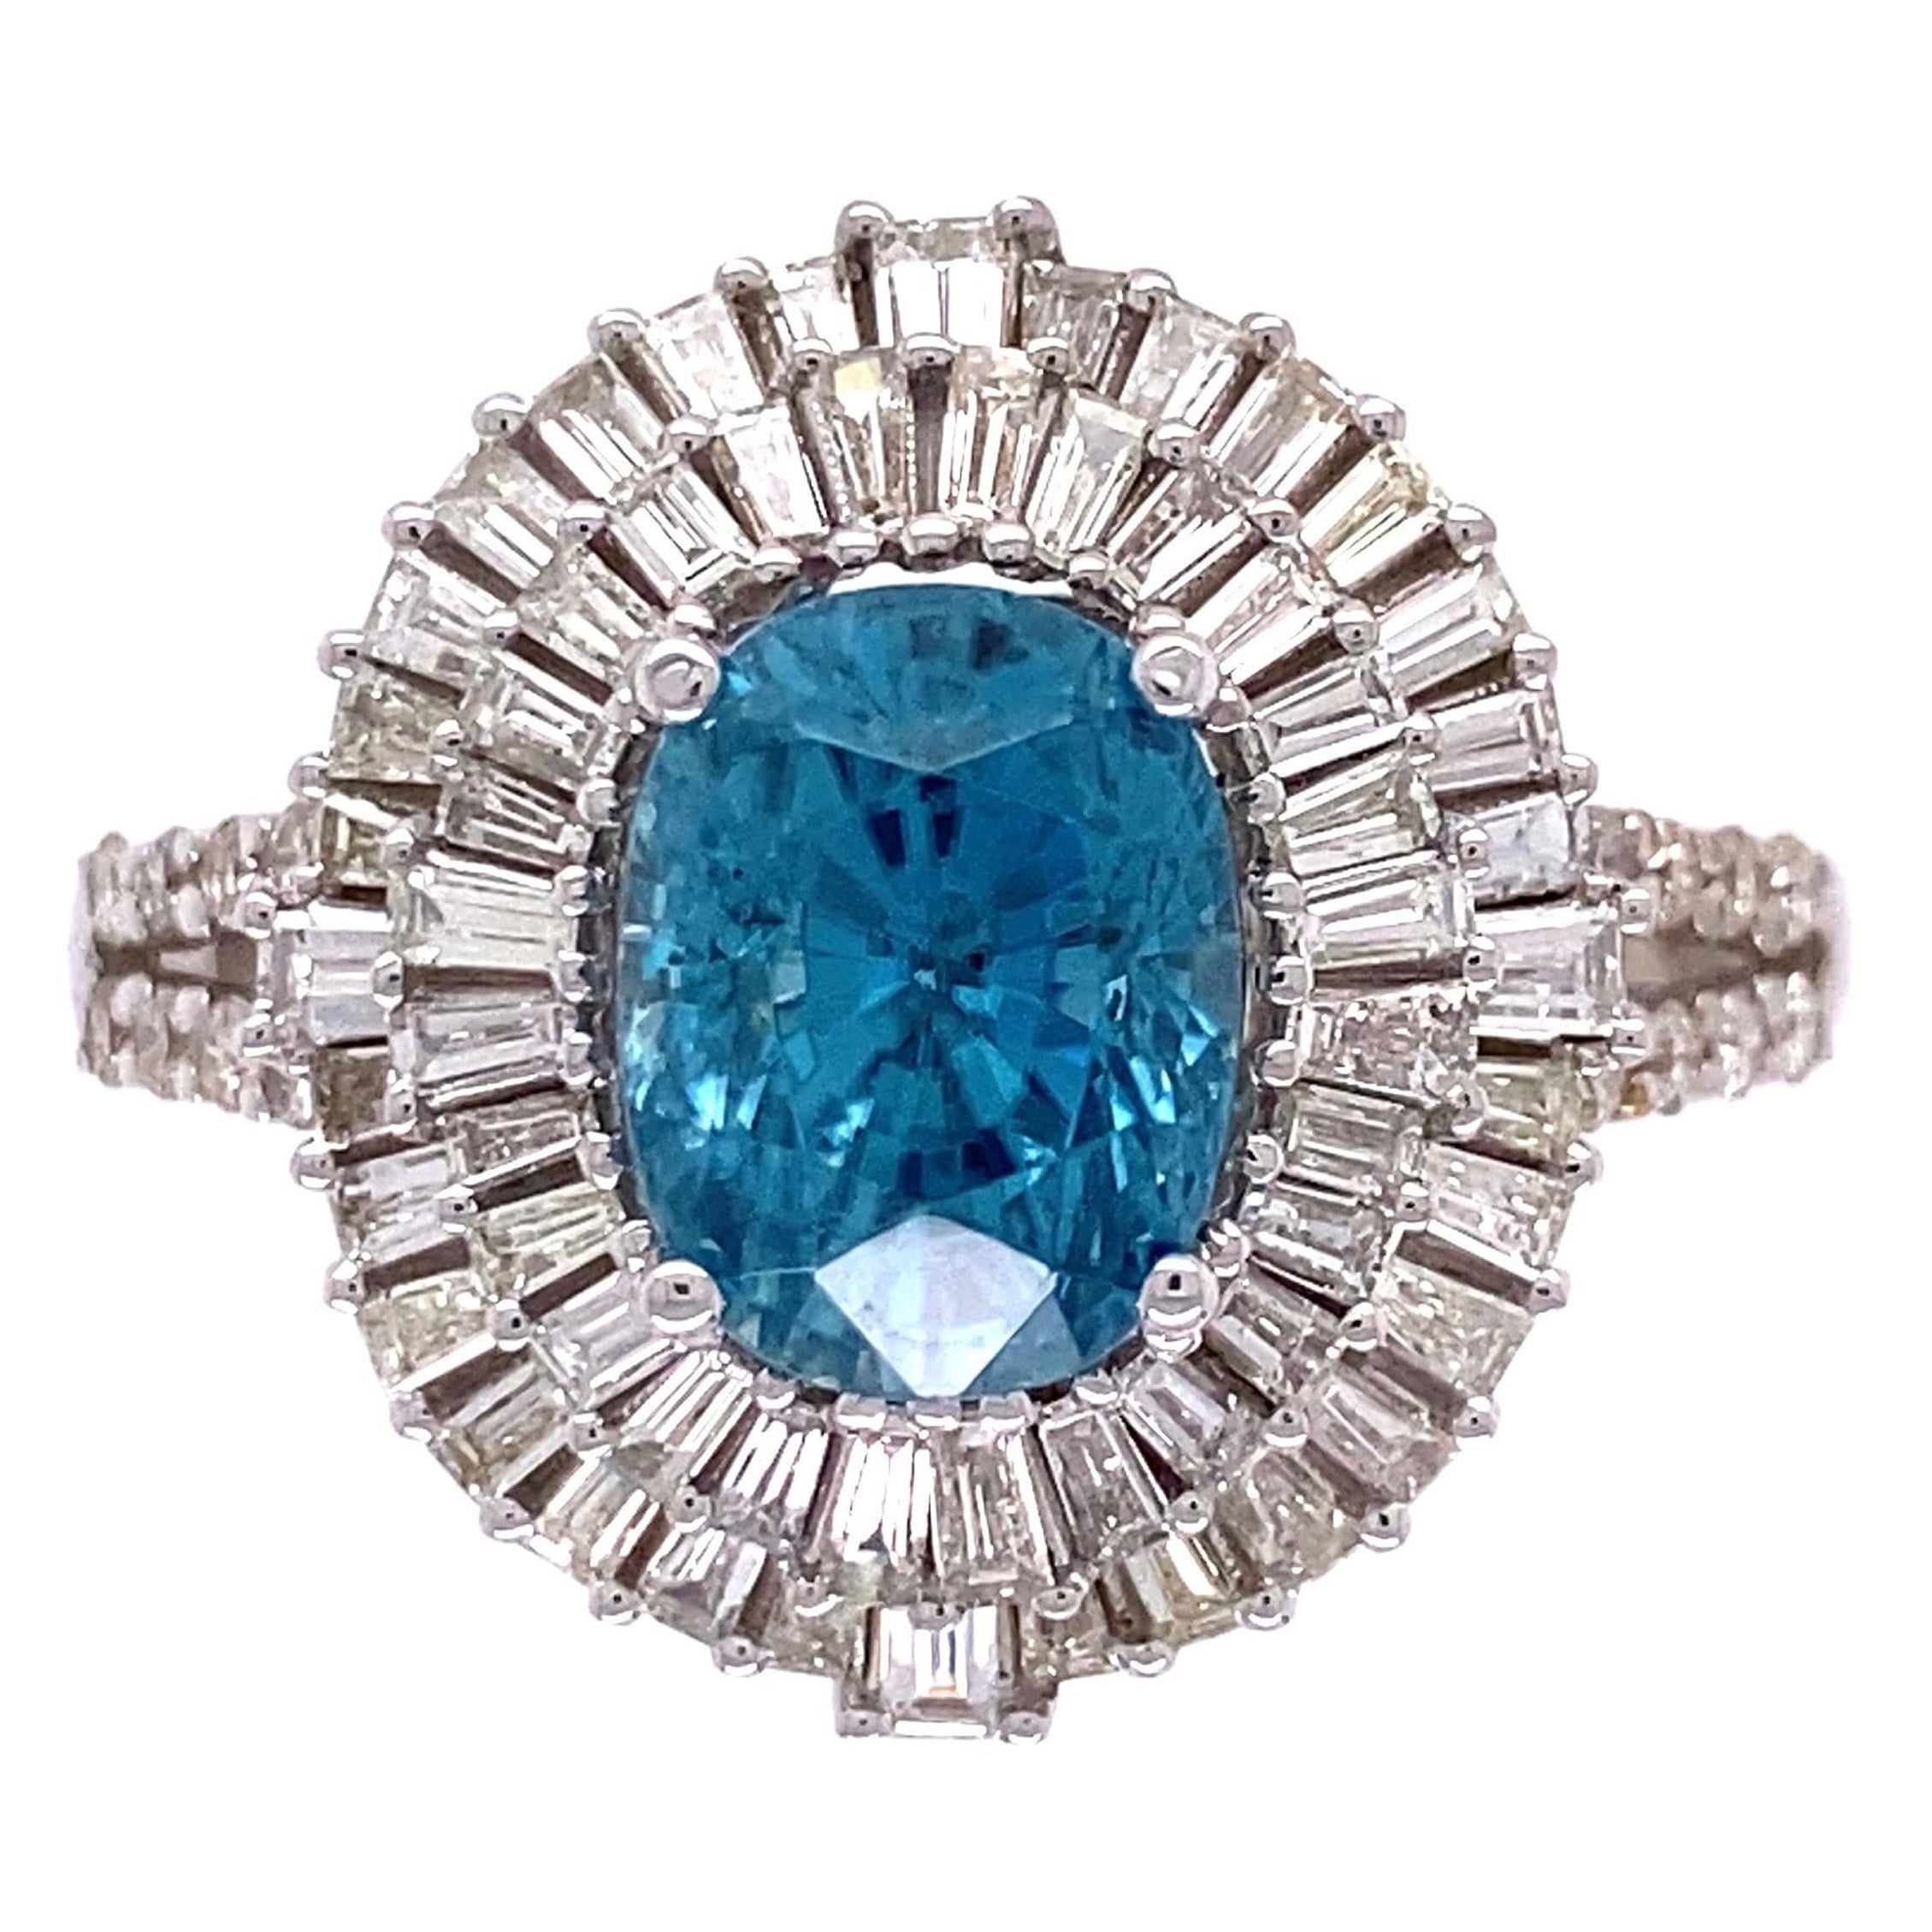 5.24 Carat Blue Zircon and Diamond Gold Cocktail Ring Estate Fine Jewelry For Sale